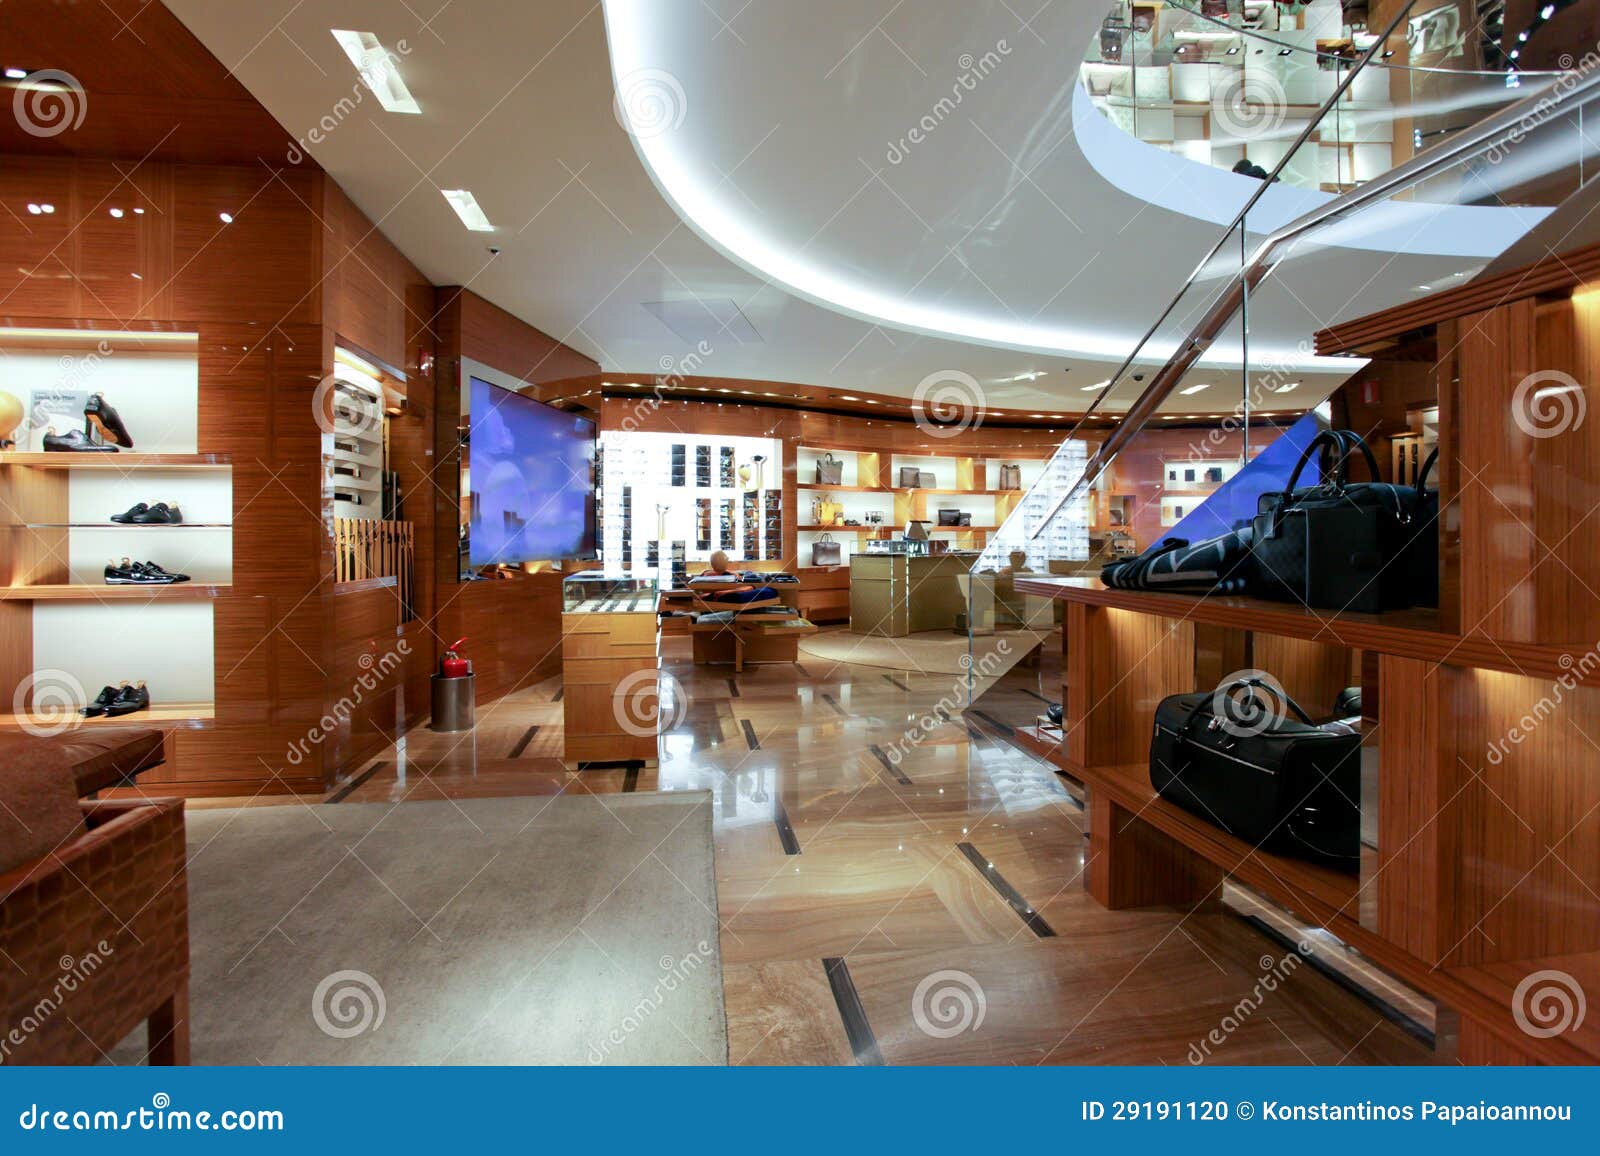 Louis Vuitton Clothing Store In Rome Editorial Image - Image of italy, merchandise: 29191120